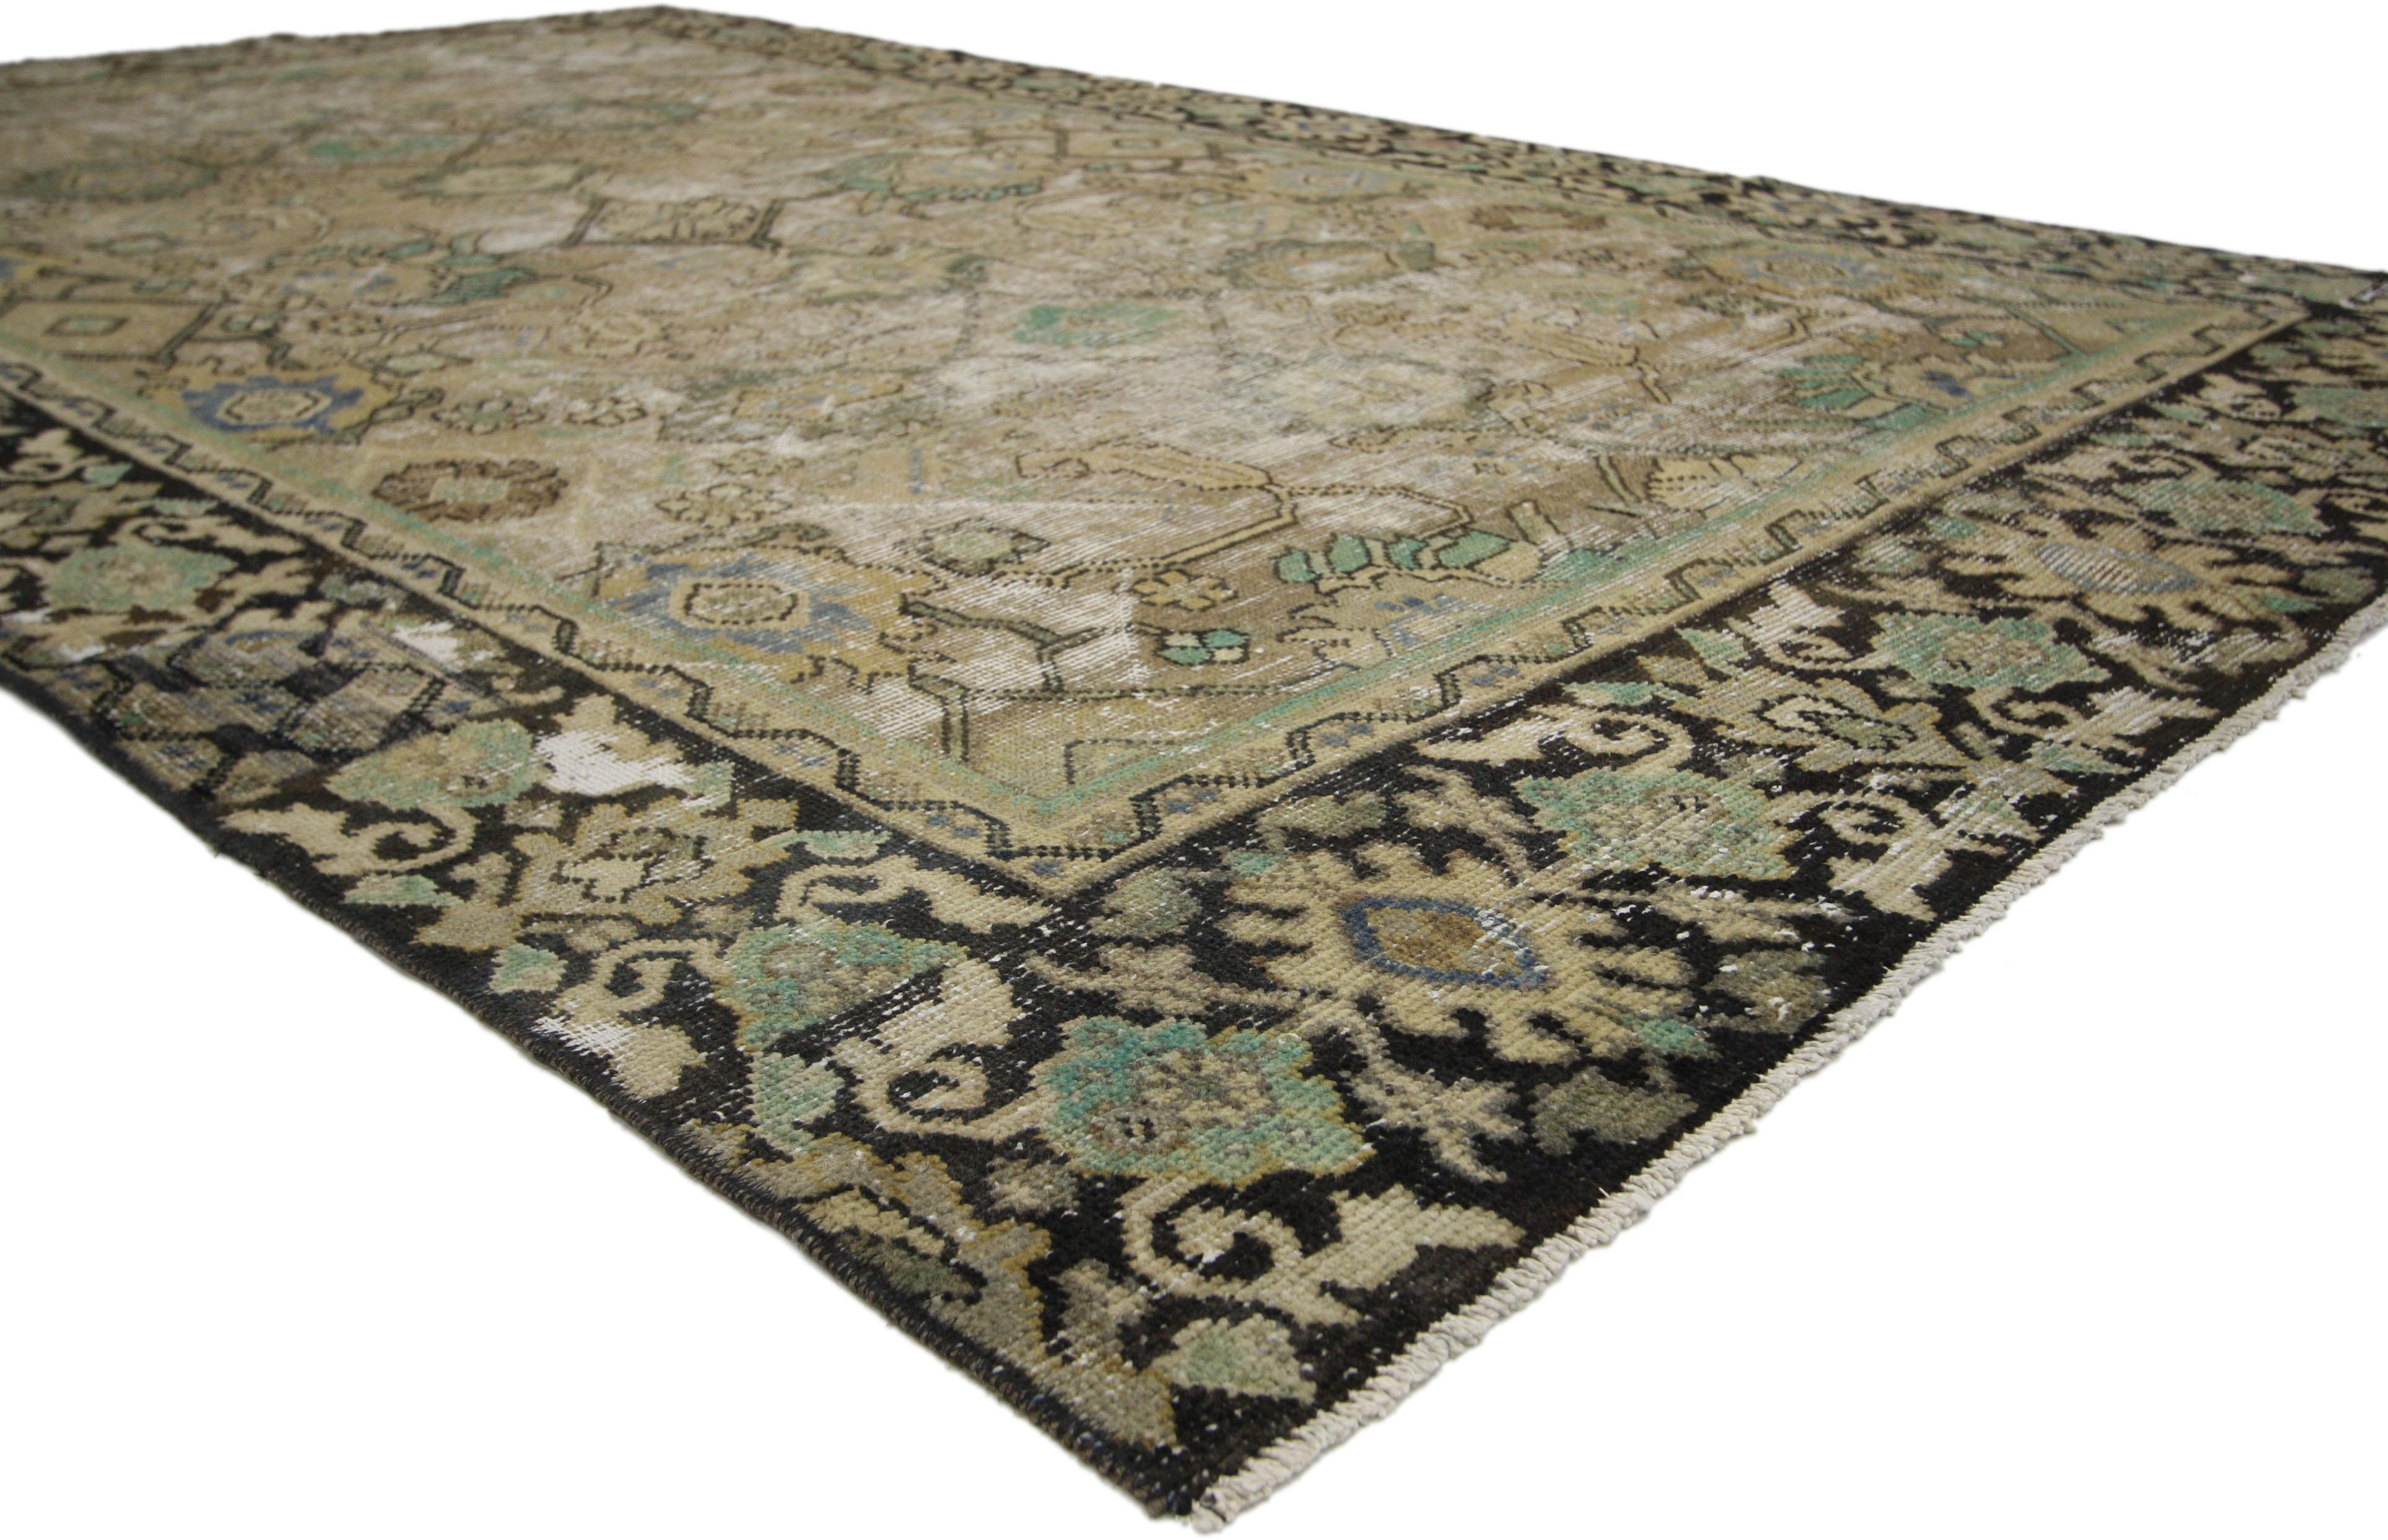 60681, distressed antique Persian Mahal rug with traditional English rustic style. With its perfectly worn-in charm and rustic sensibility, this hand knotted wool distressed antique Persian Mahal rug will take on a curated lived-in look that feels